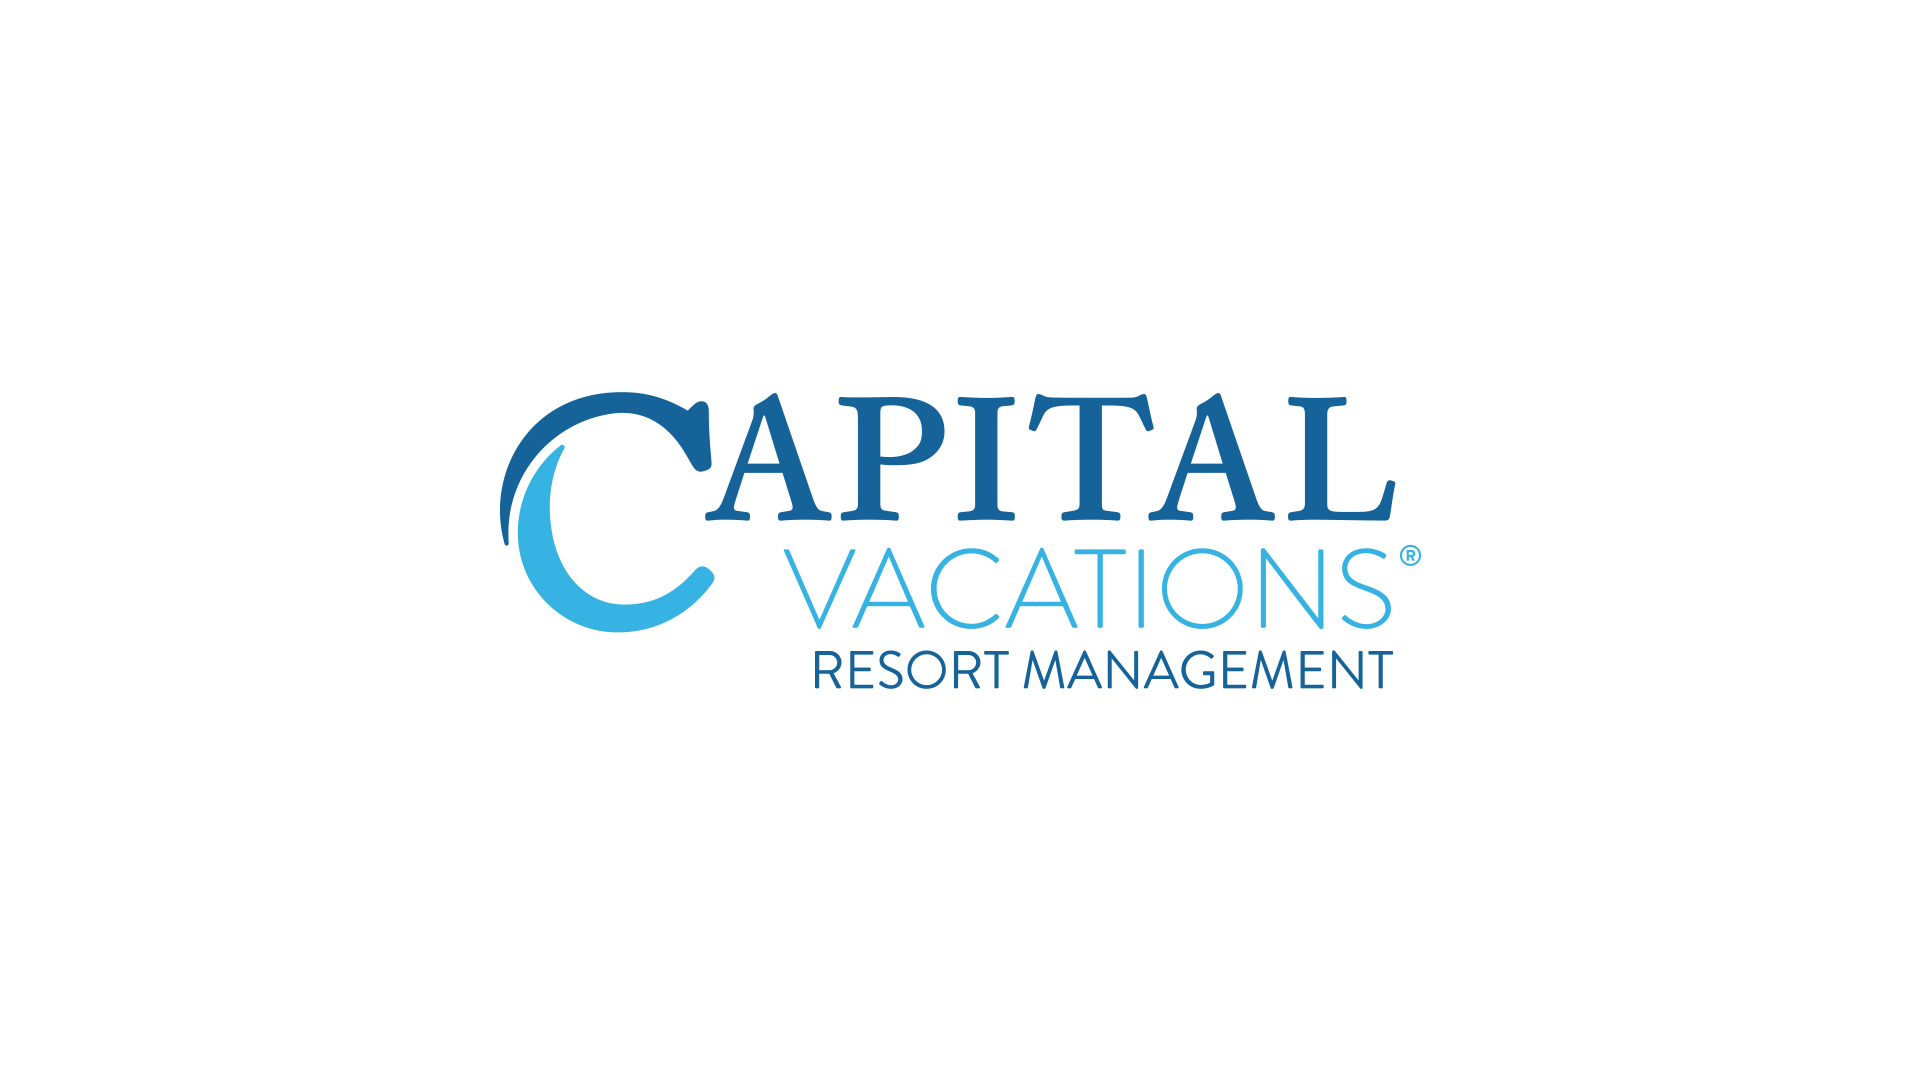 Capital Vacations announces the renewal of management contracts for 17 resorts